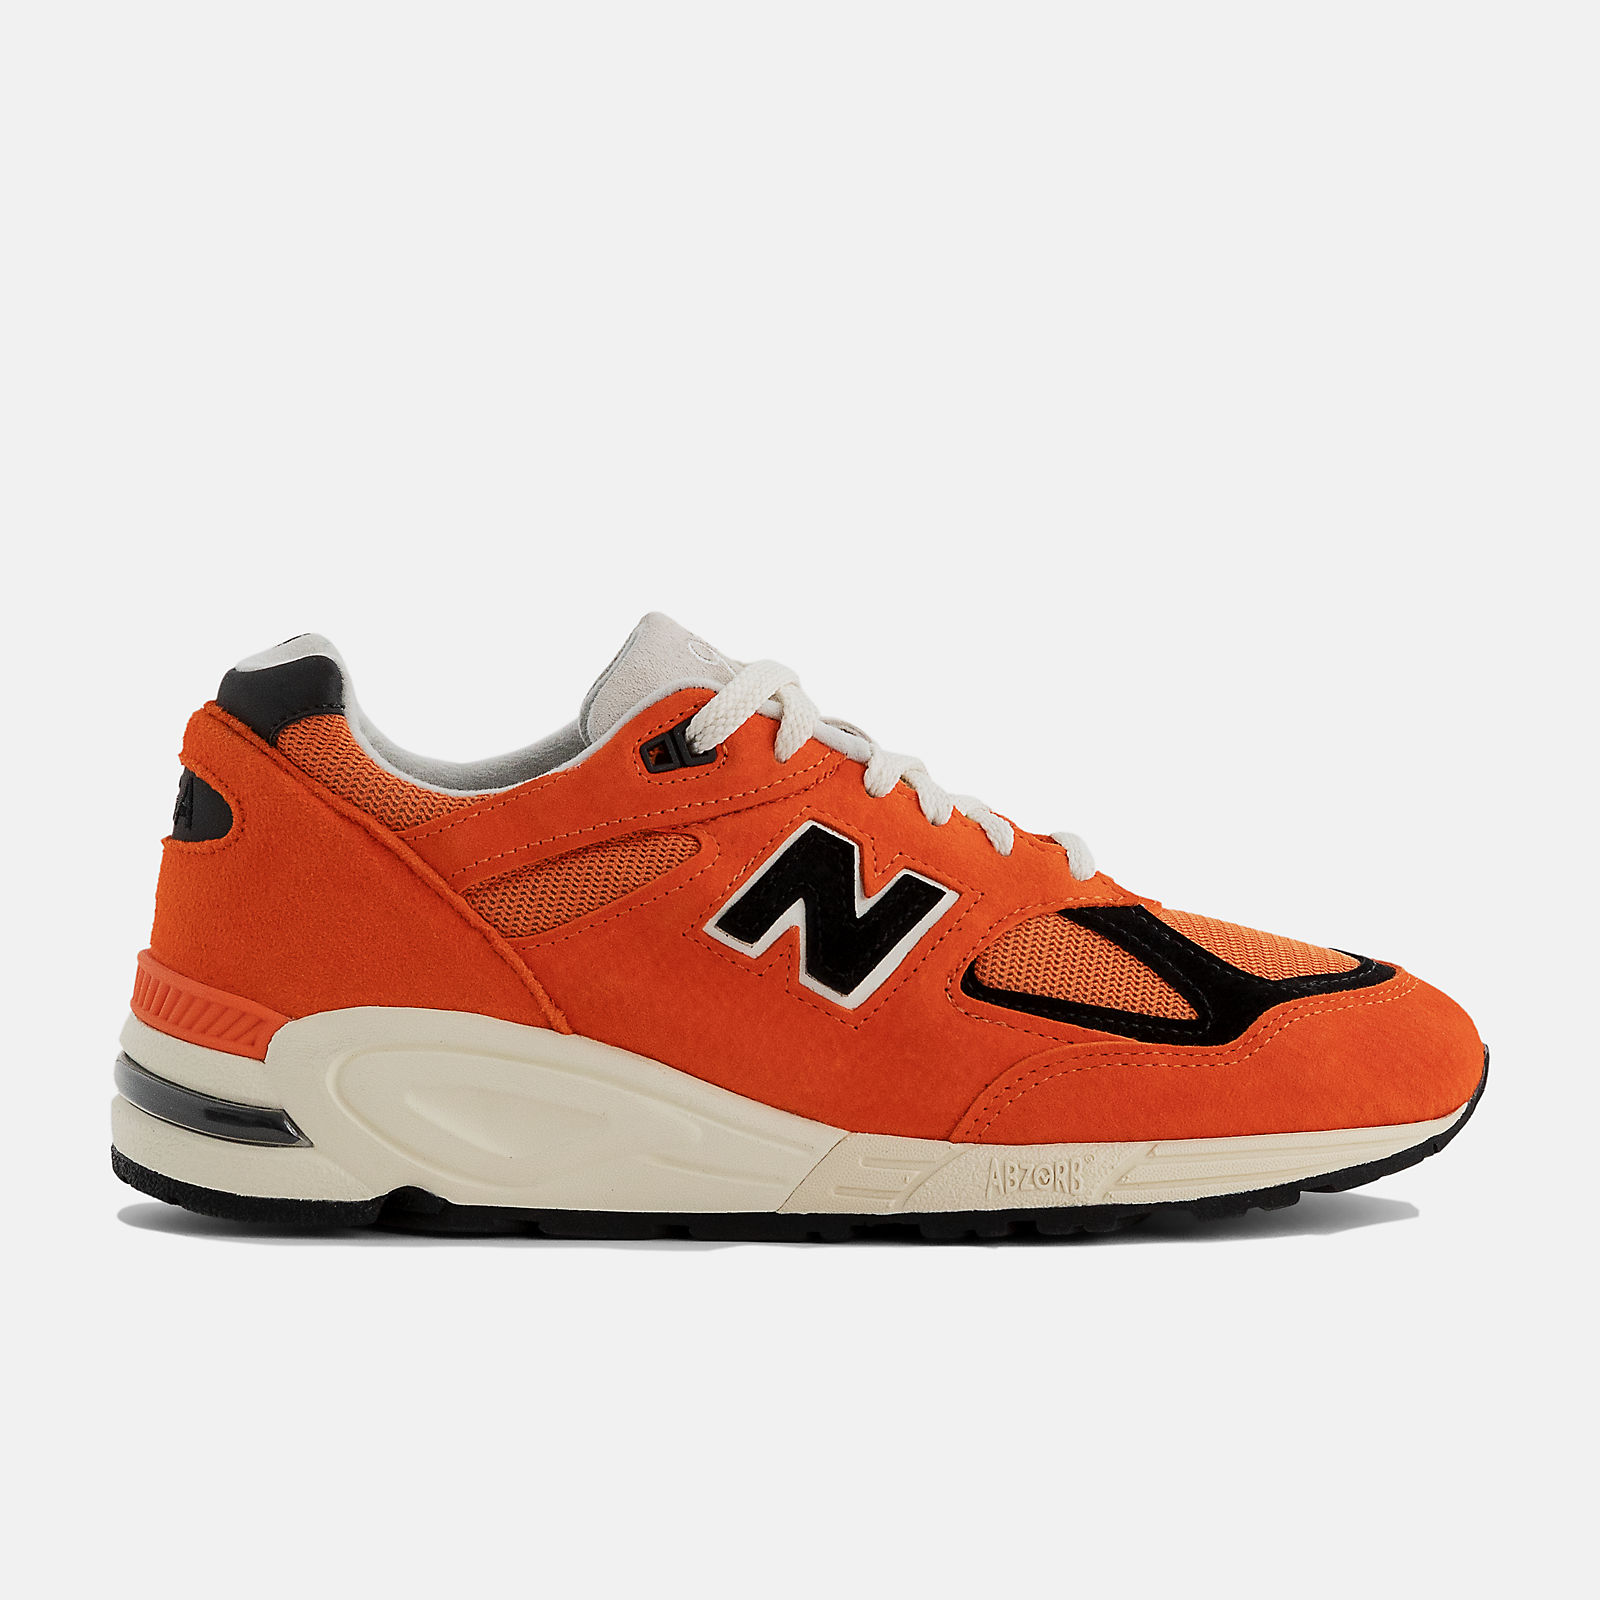 Men's MADE in USA 990v2 Shoes - New Balance